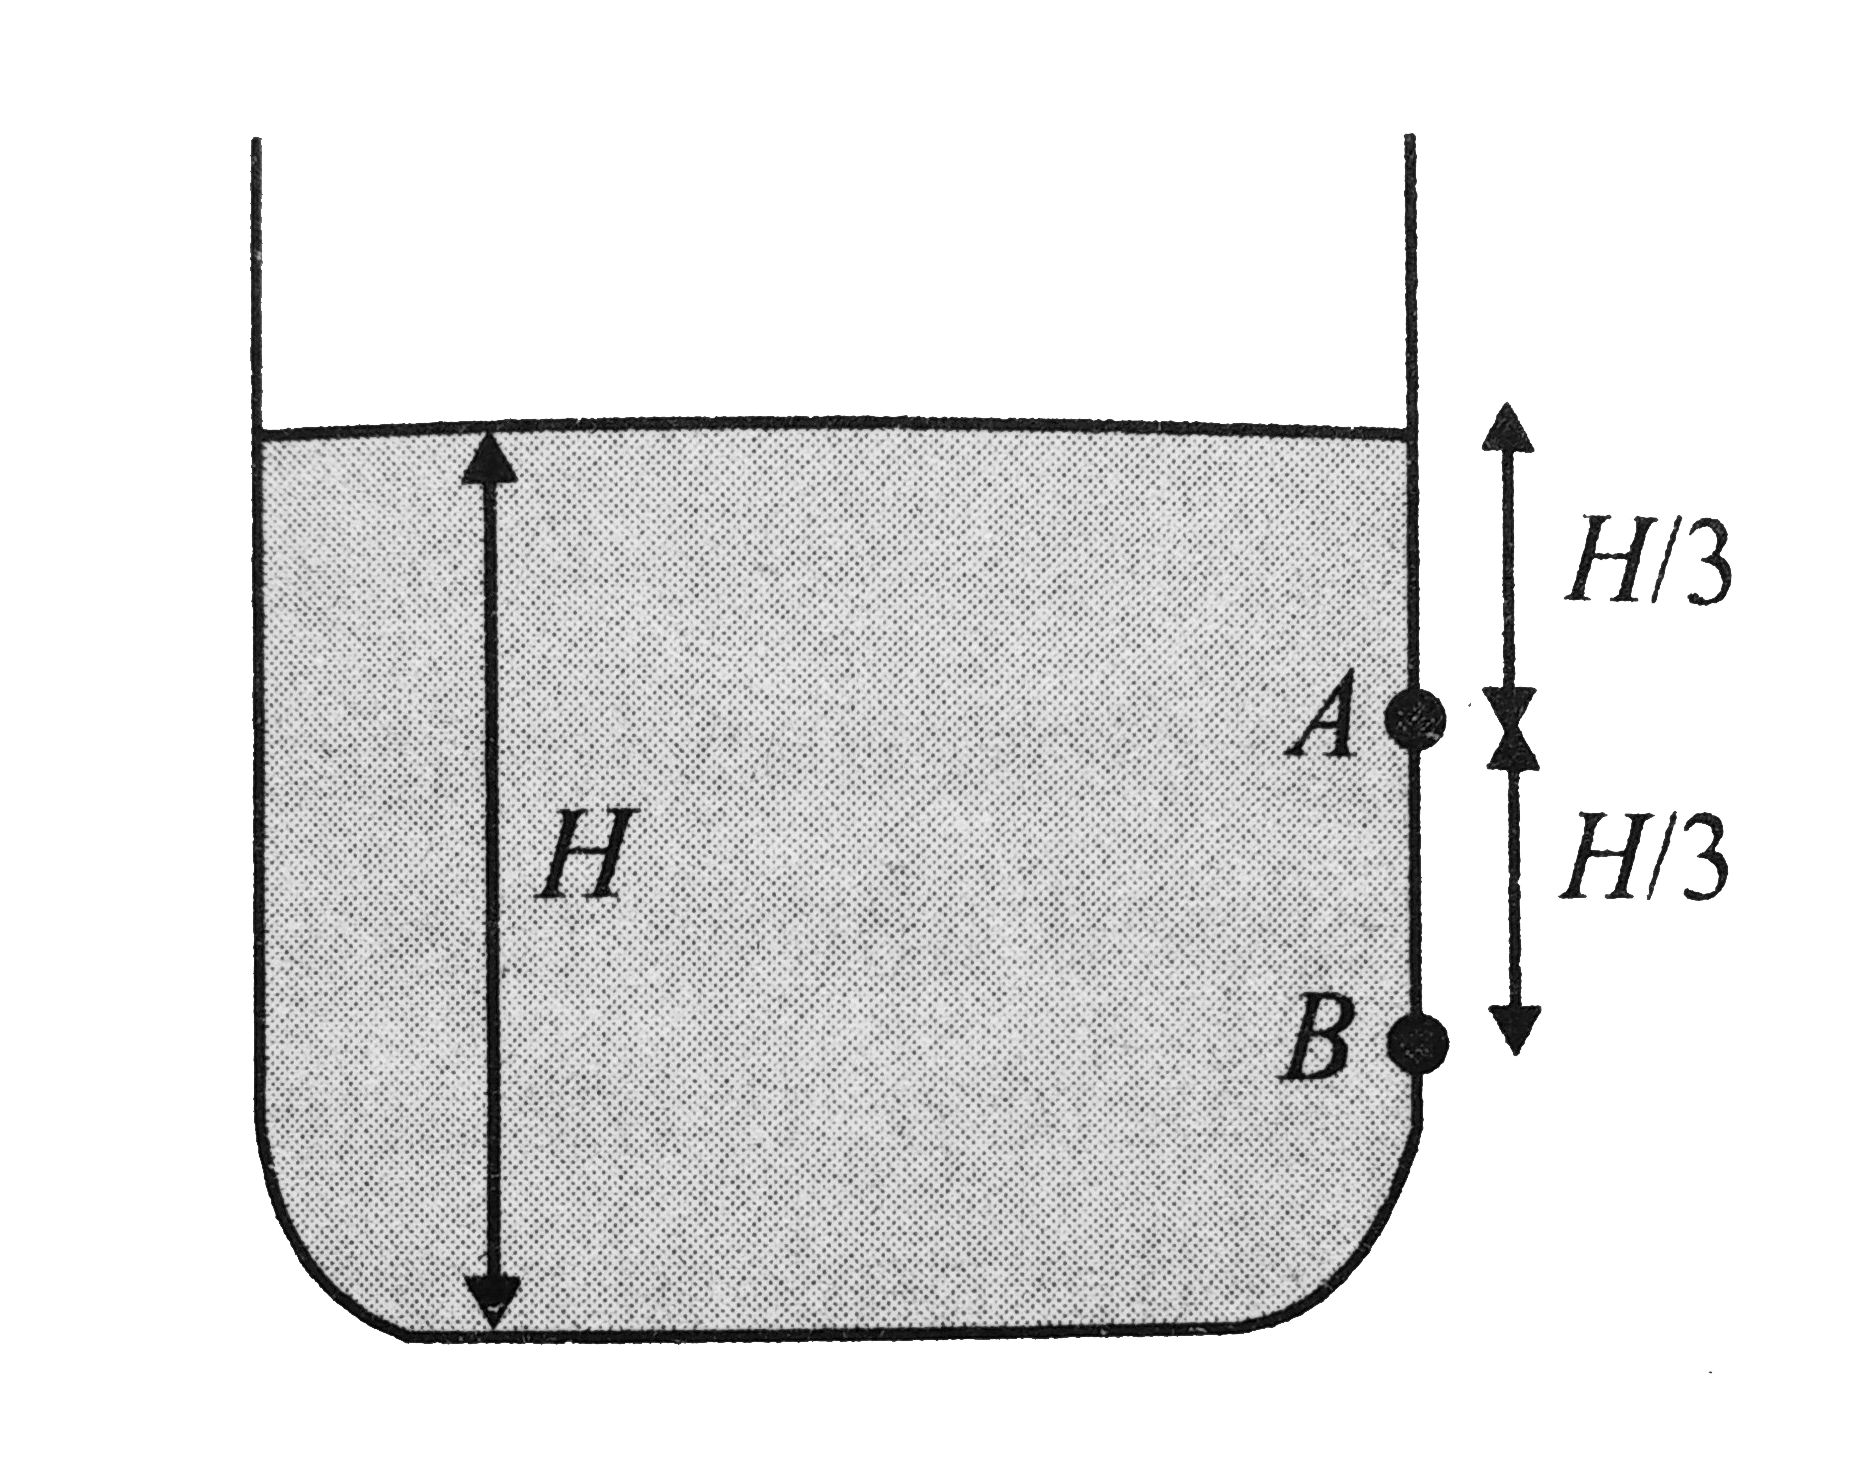 The area of two holes A and B are 2a and a, respectively, The holes are at height (H//3) and (2H//3) from the surface of water. Find the correct option(s):